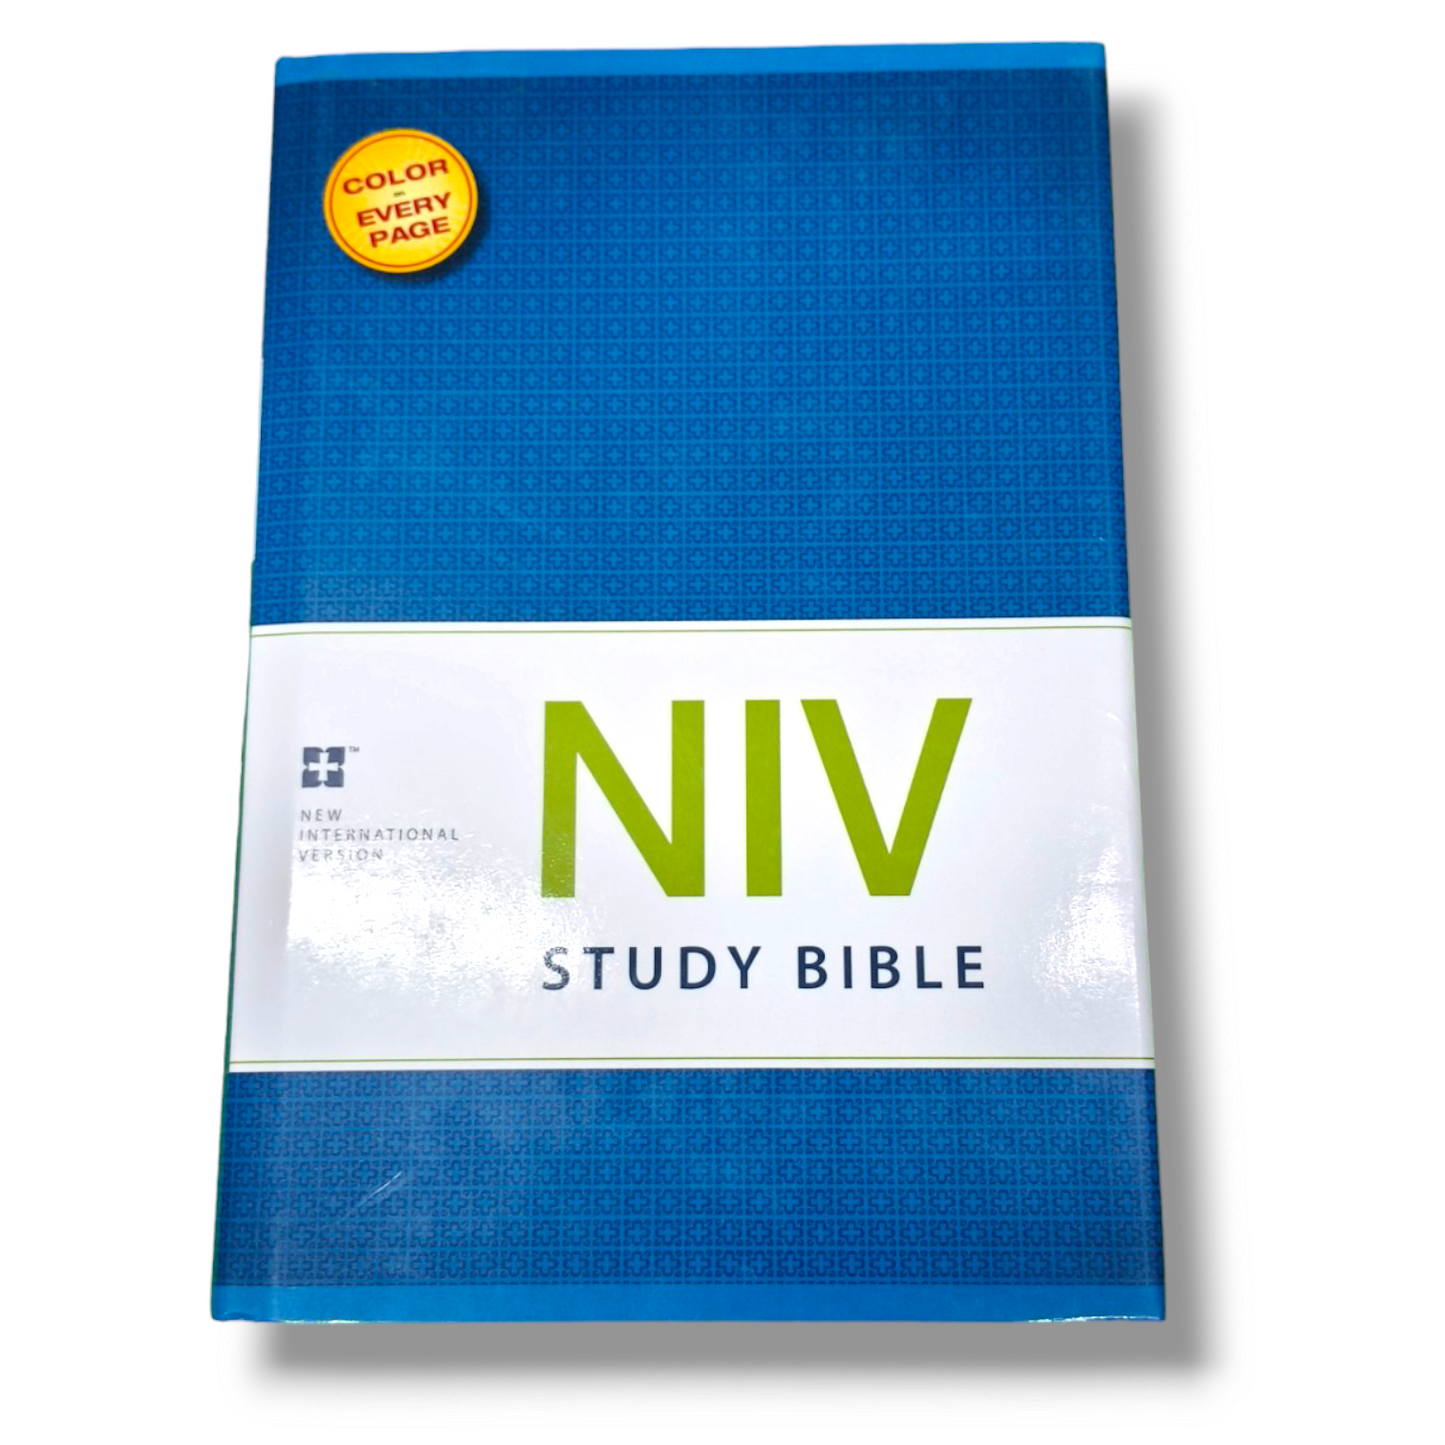 NIV Study Bible | Hard Bound Edition | Large Print | With Related Picture's | New Edition